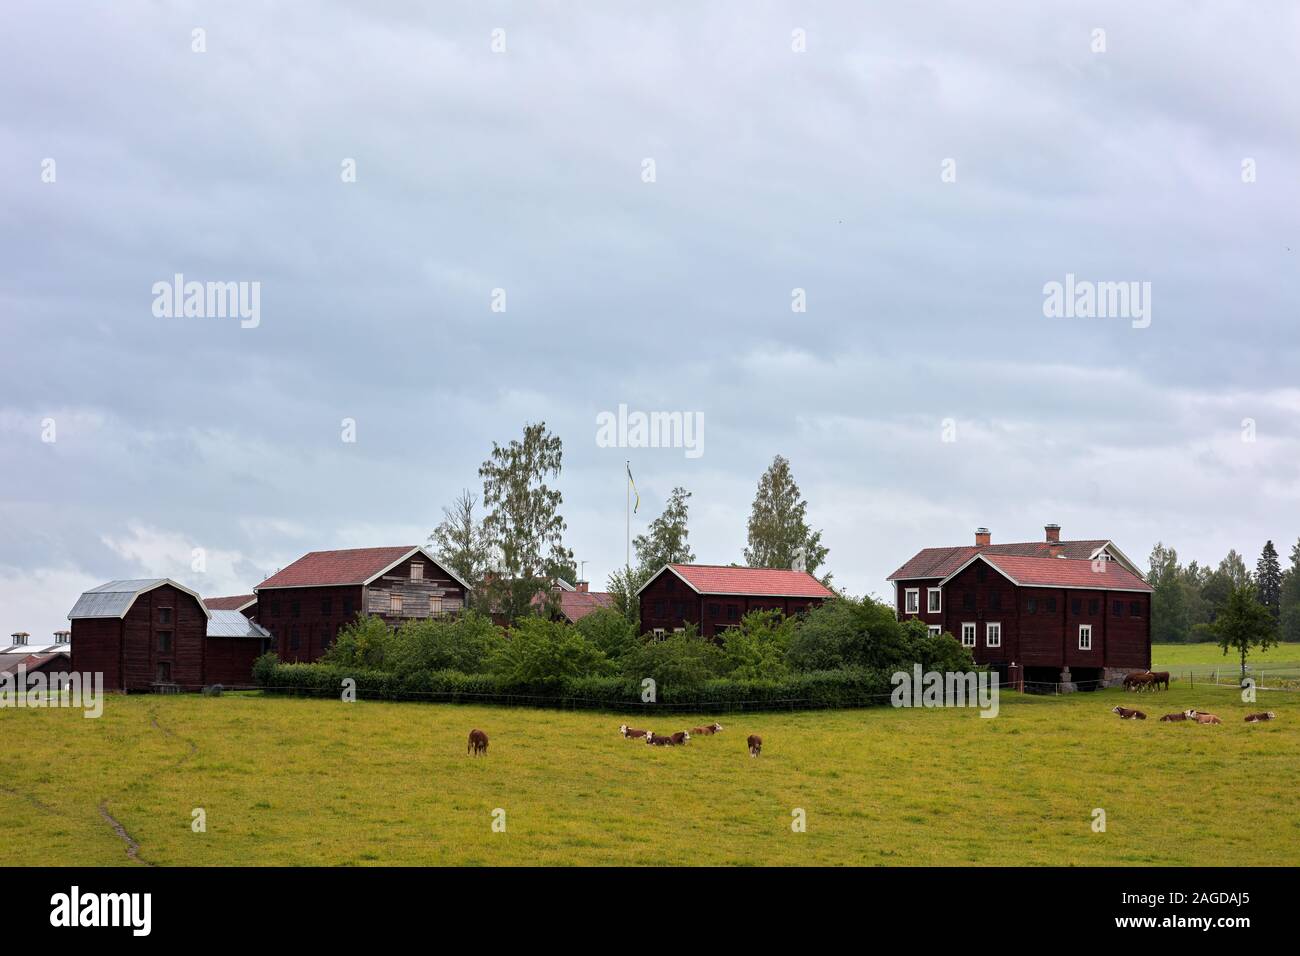 Group of houses near Delsbo, Hälsingland, Sweden with cattle around Stock Photo